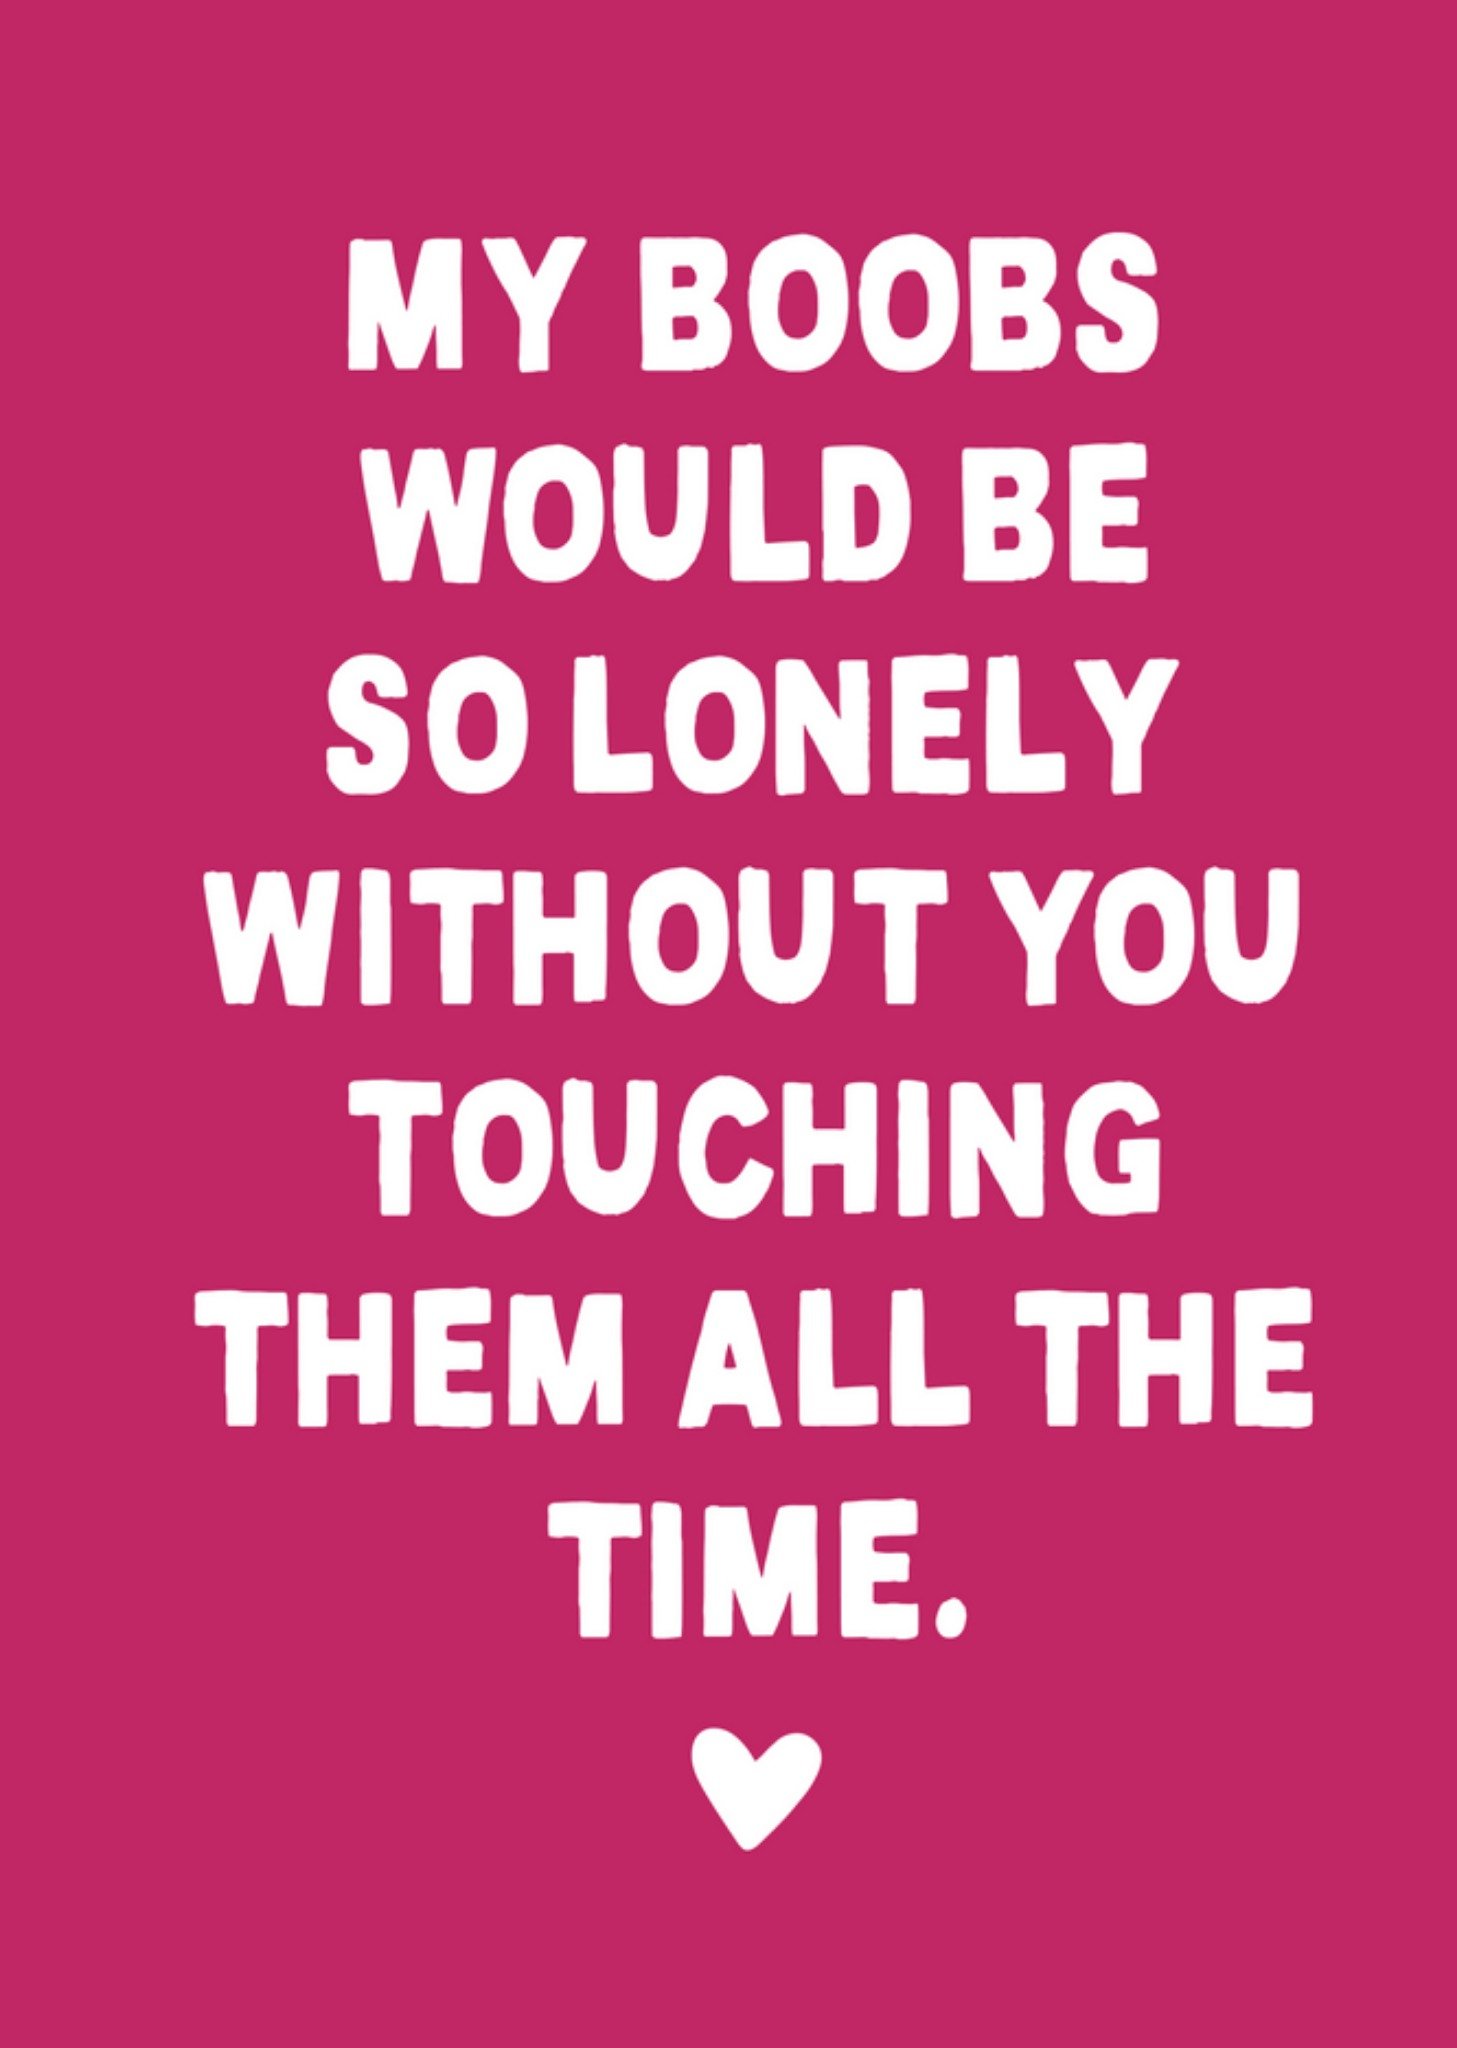 Moonpig Funny My Boobs Would Be So Lonely Without You Typography Valentine's Day Card, Large